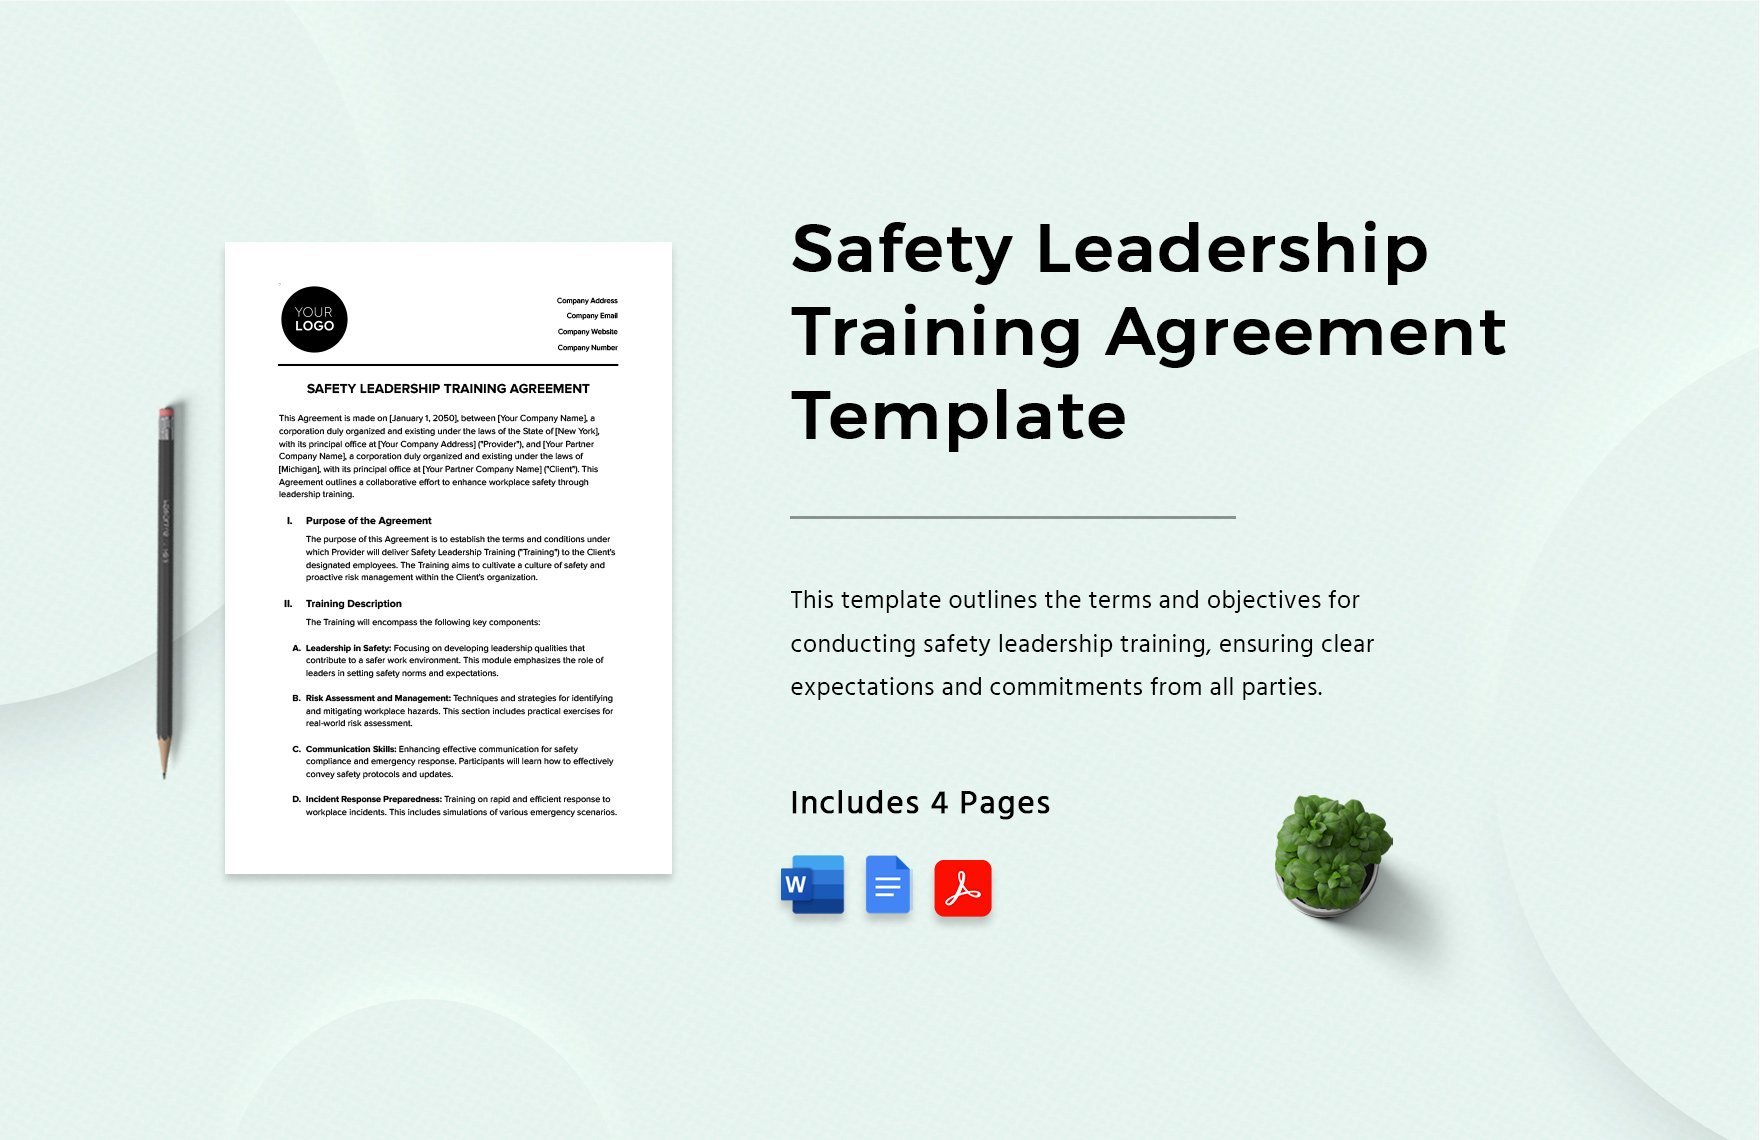 Safety Leadership Training Agreement Template